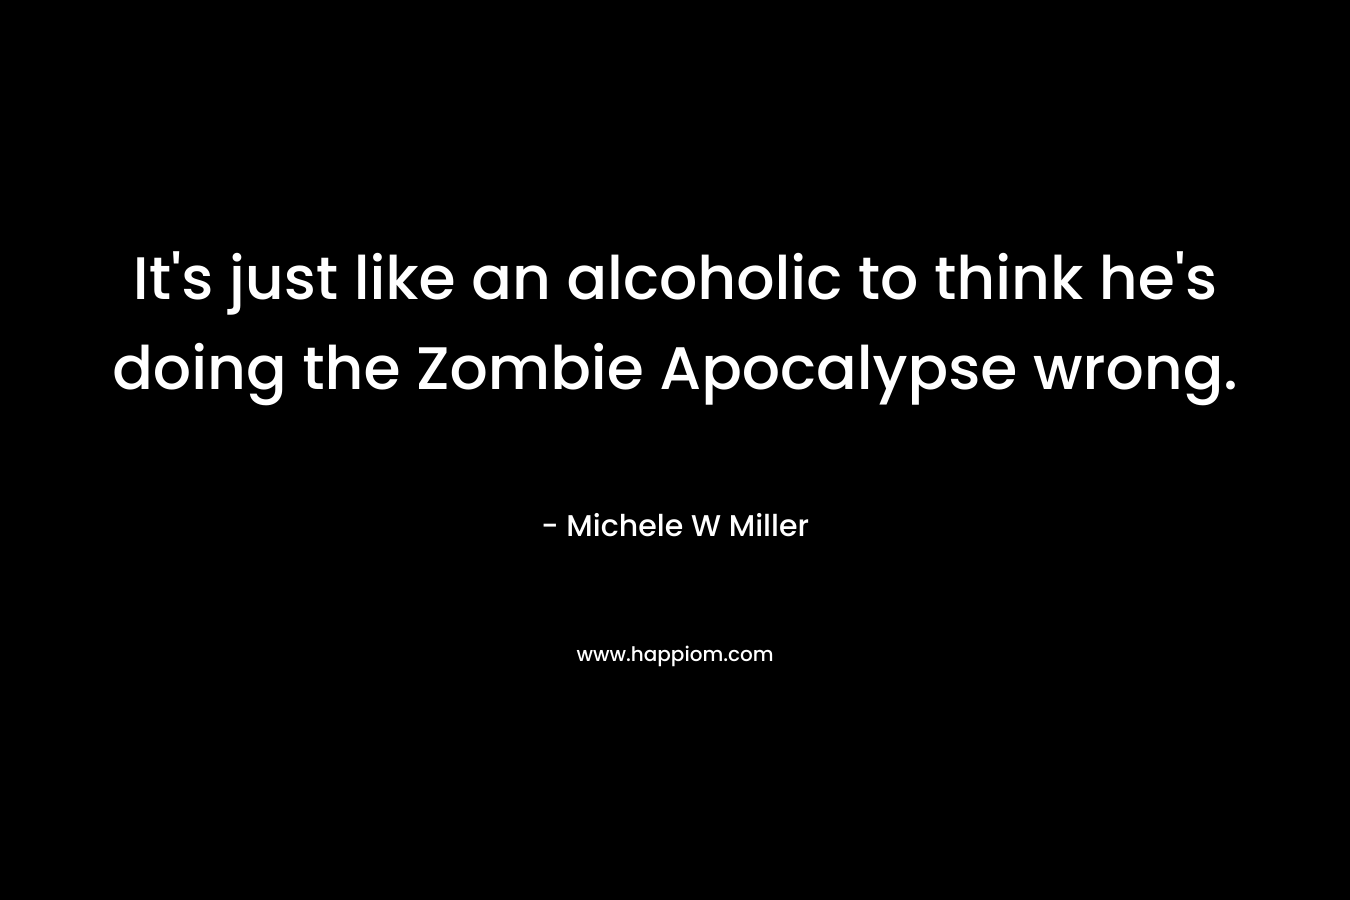 It's just like an alcoholic to think he's doing the Zombie Apocalypse wrong.